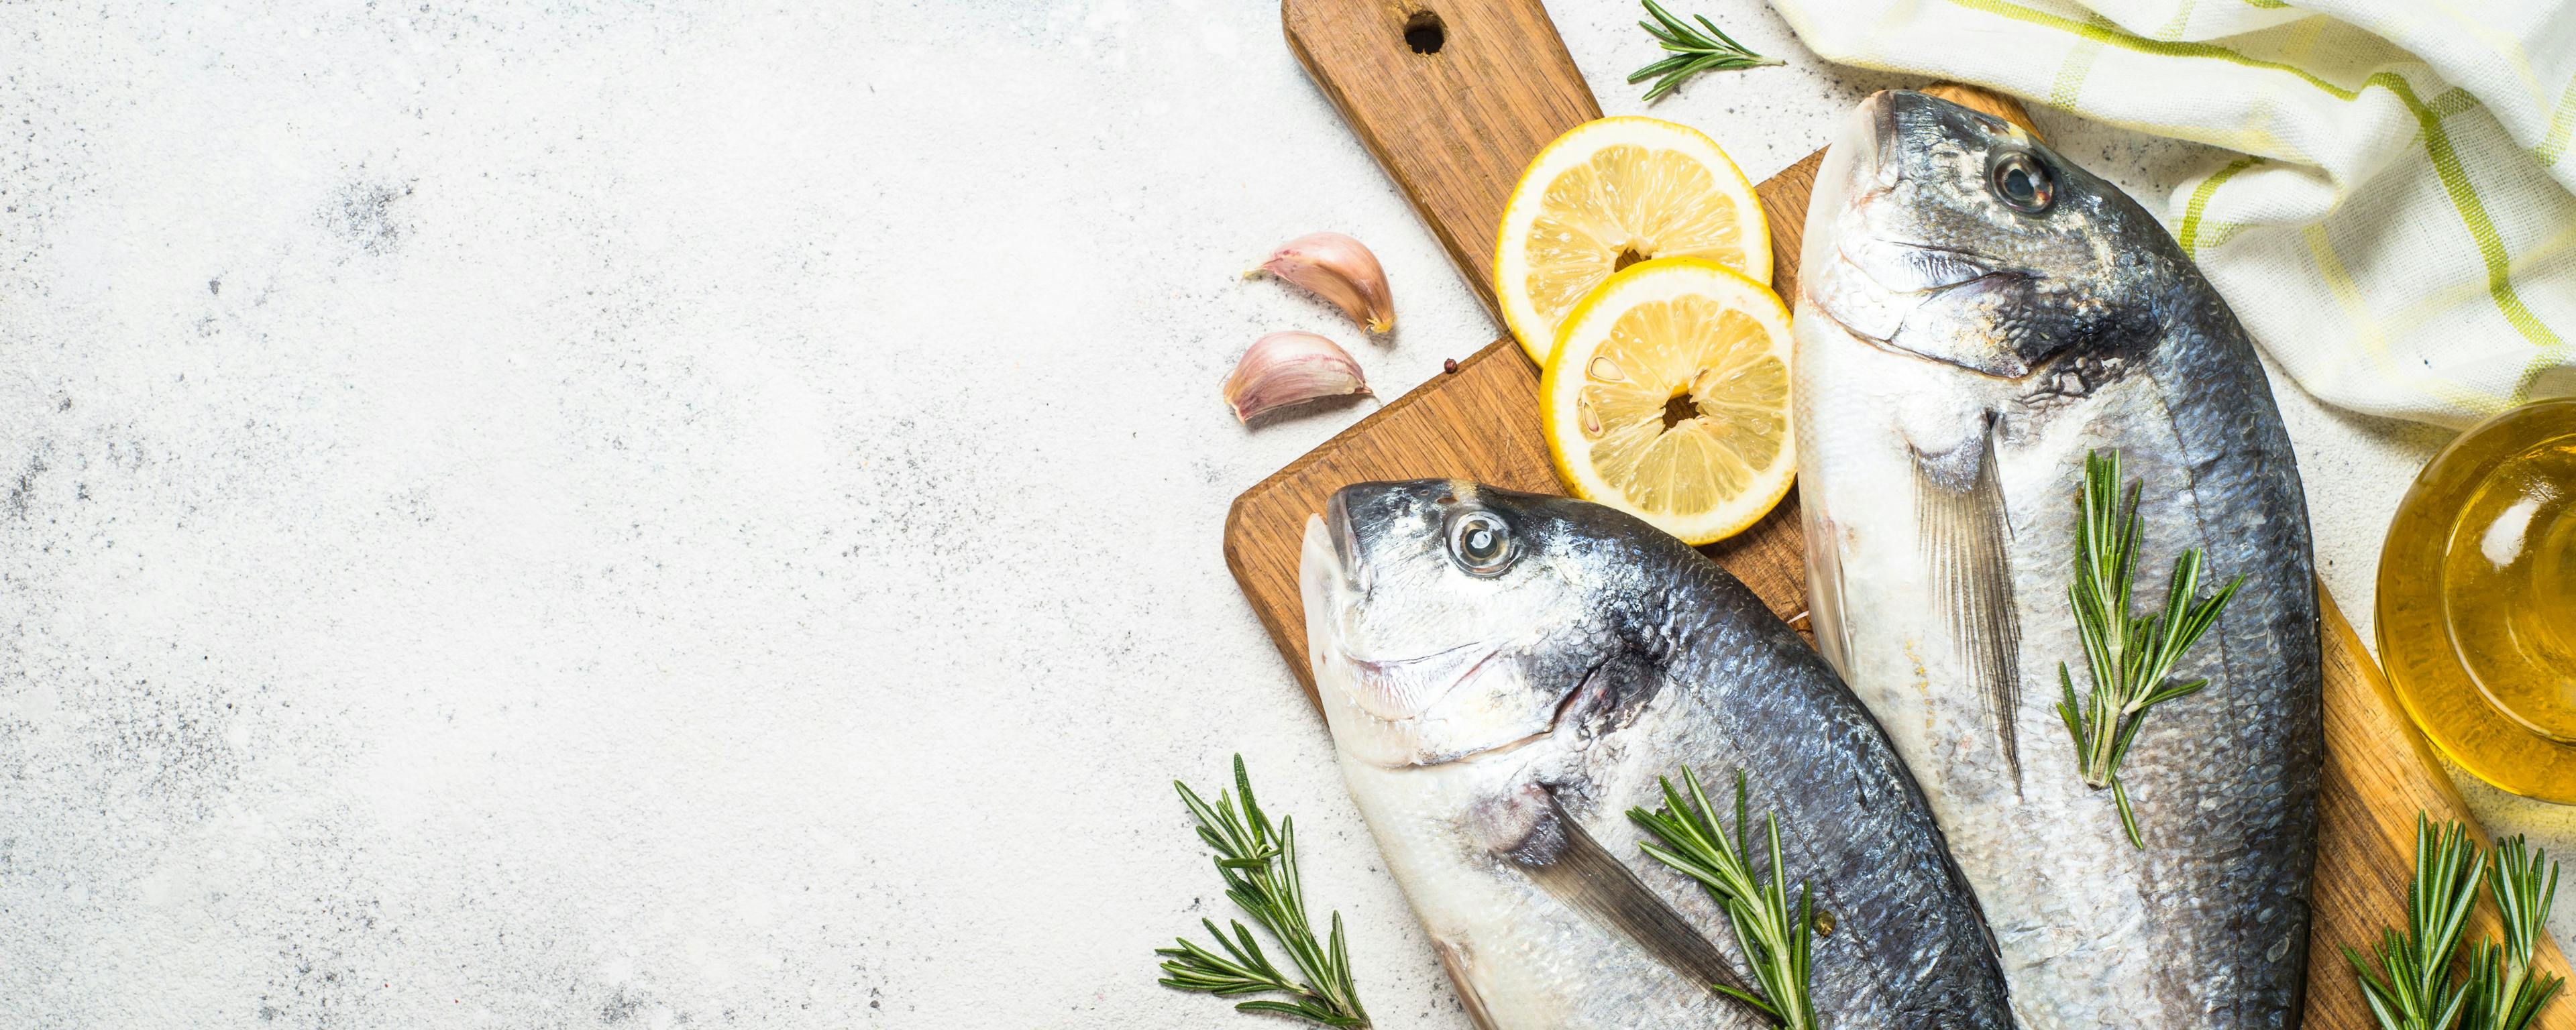 Fish and omega-3 supplement intake found lacking in pregnant women | Image Credit: © nadianb - © nadianb - stock.adobe.com.